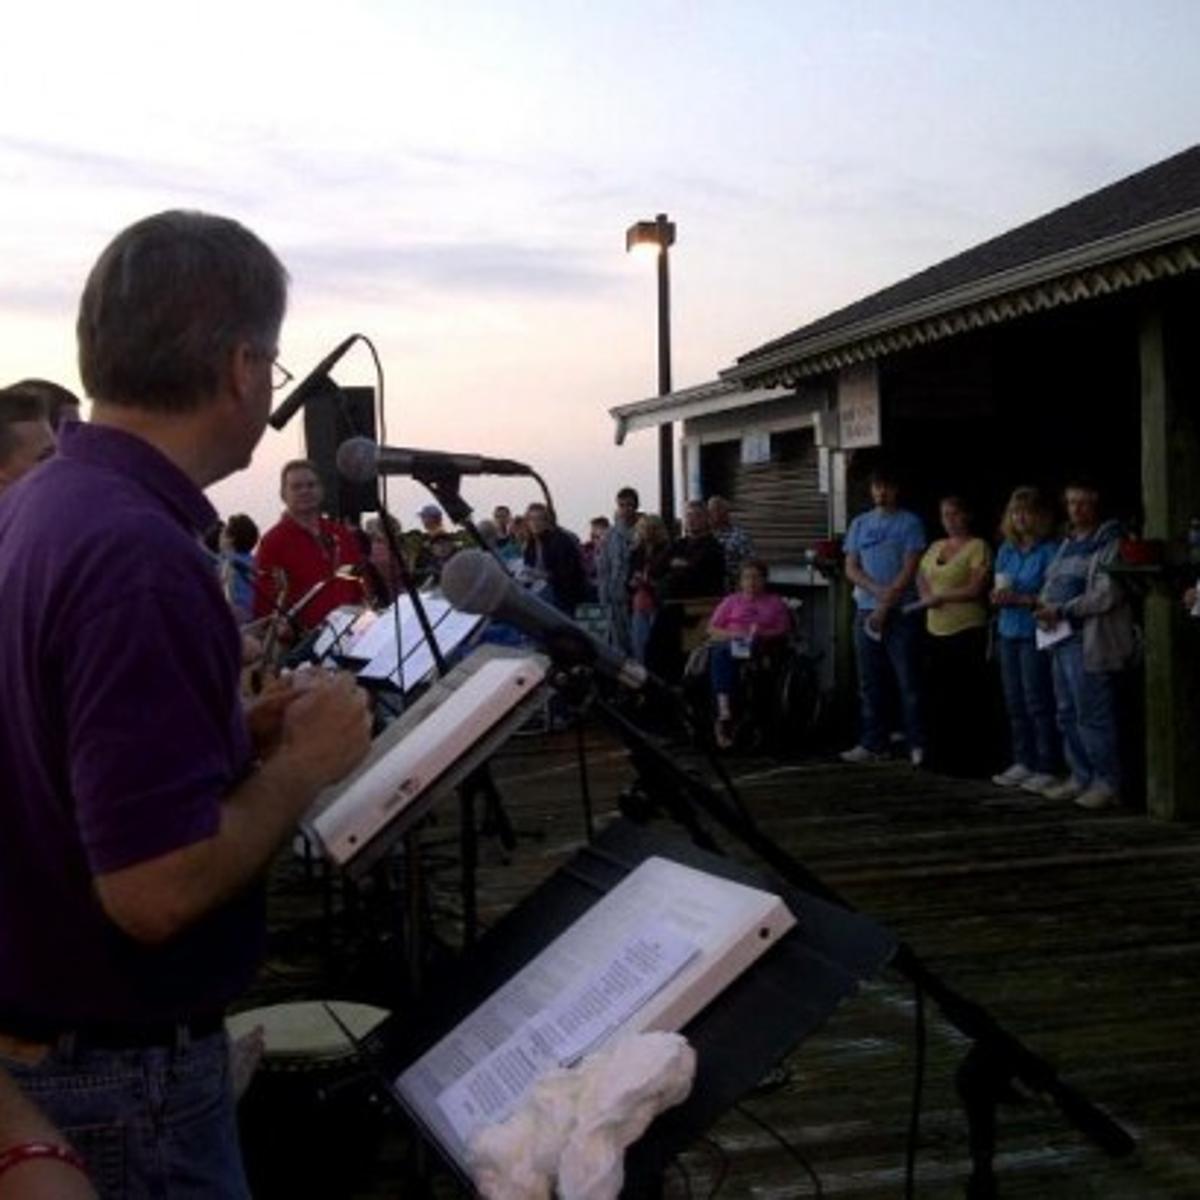 Garden City Pier Service Brings People Together Local News